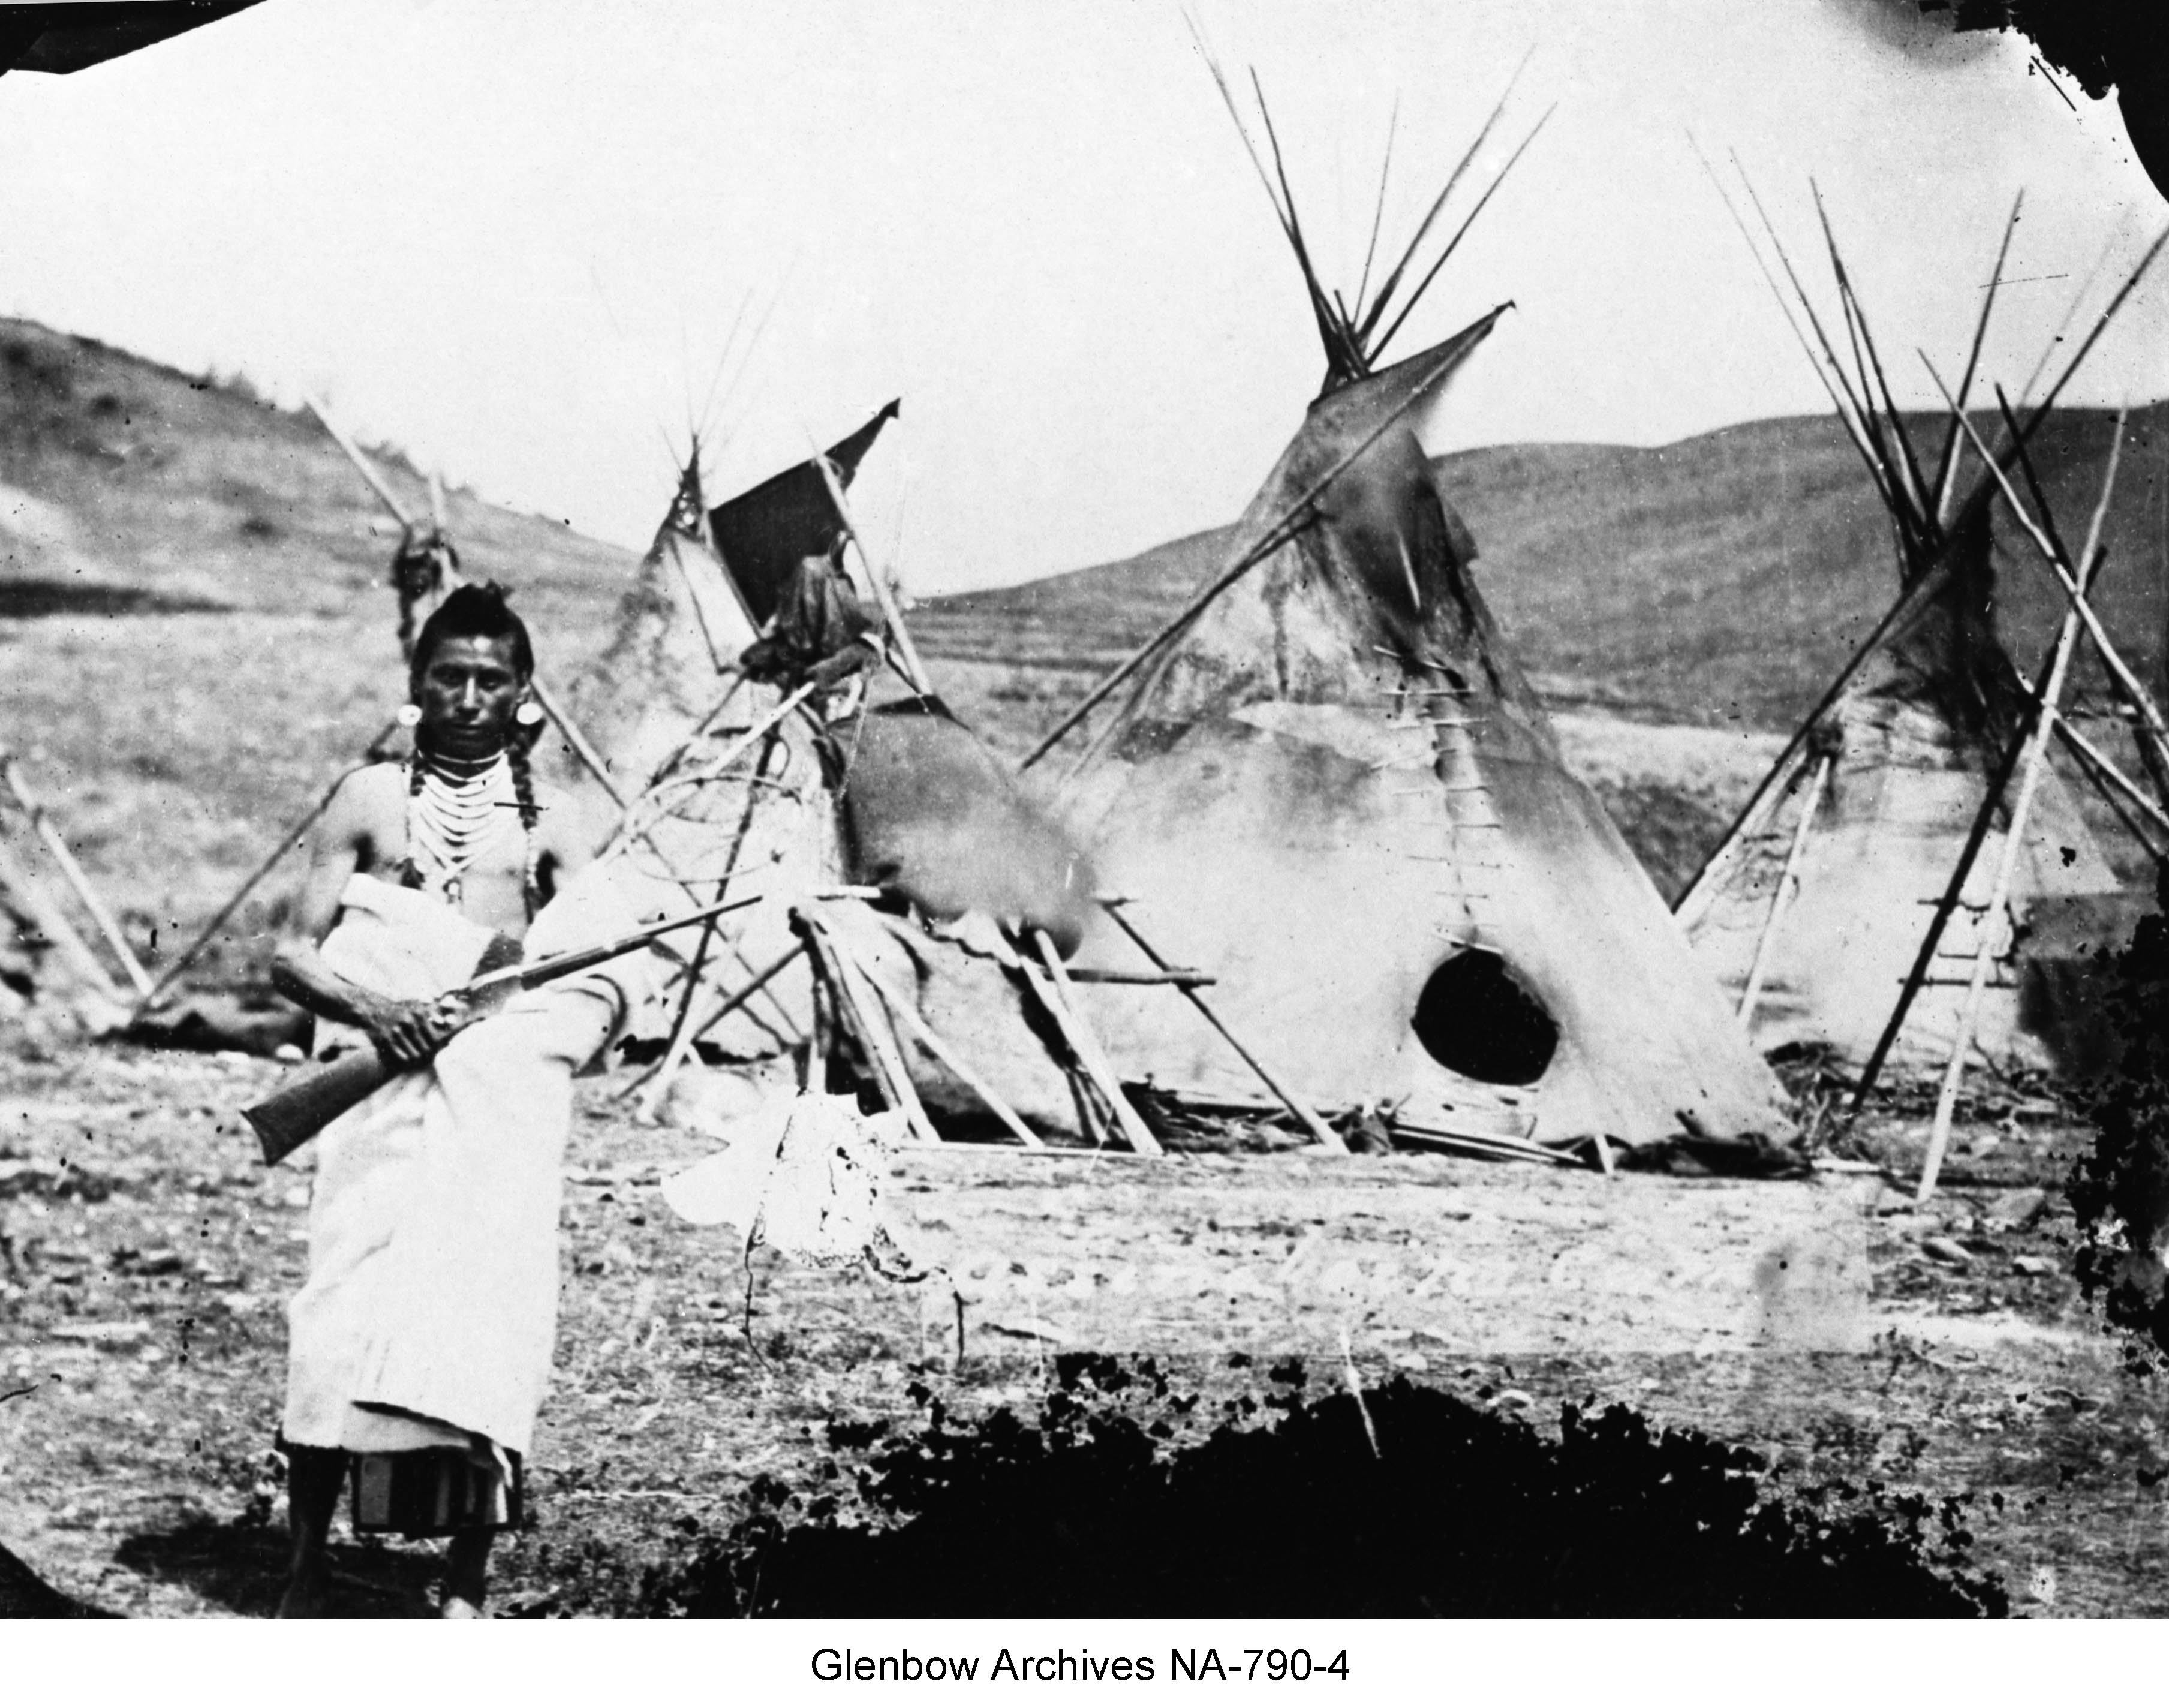 Assiniboine camp in the Cypress Hills